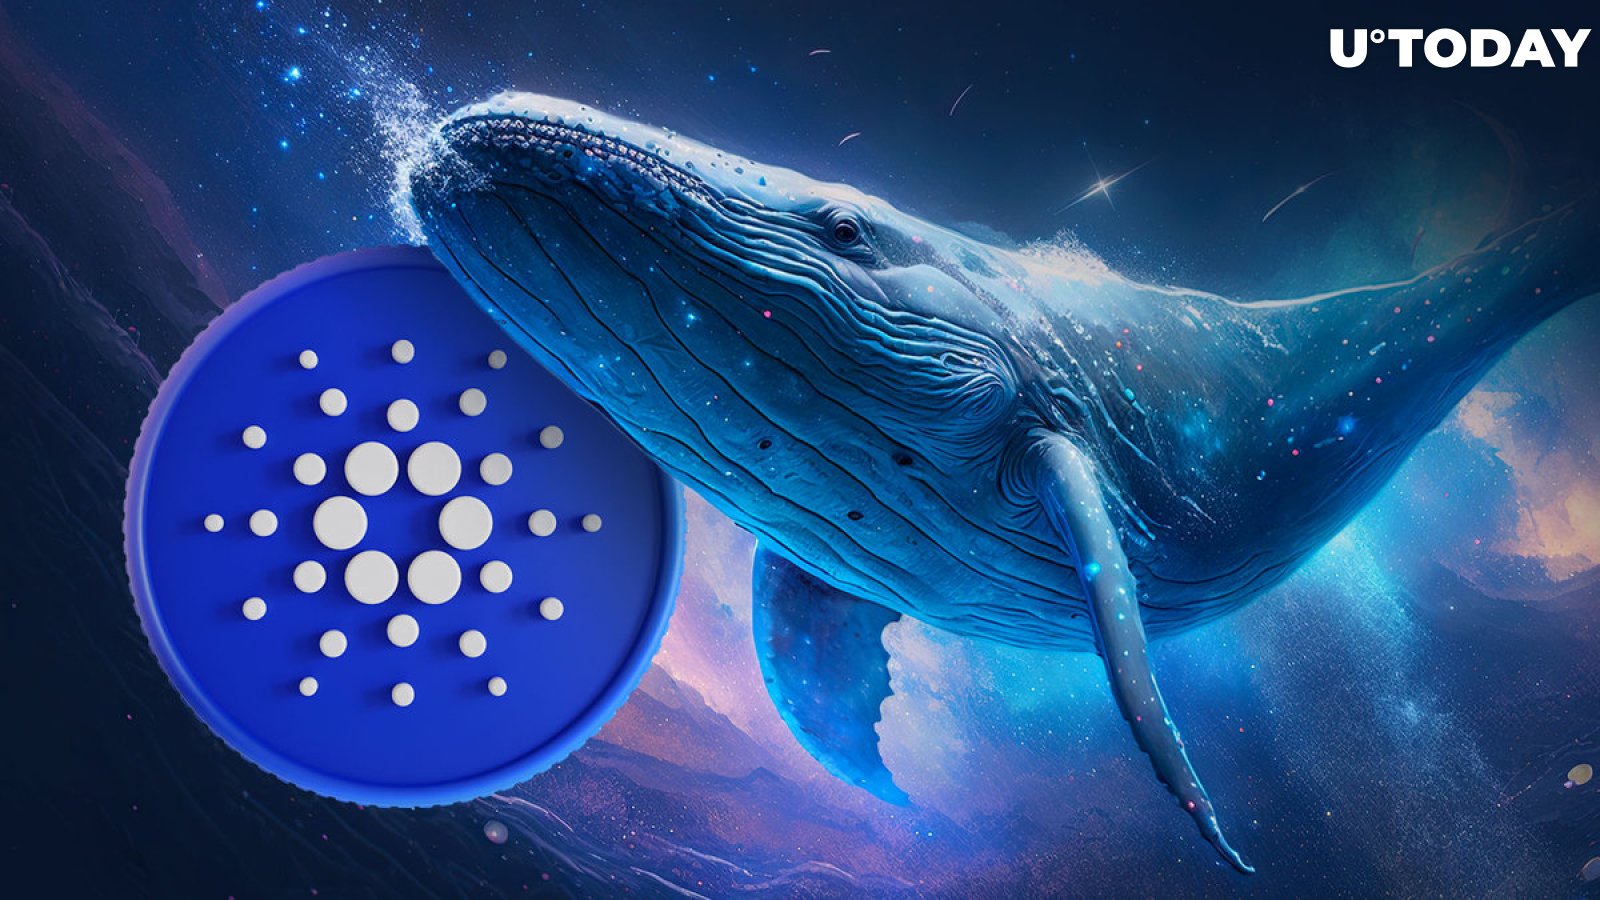 Cardano (ADA) Whale Activity Surges Massively: What's Happening?